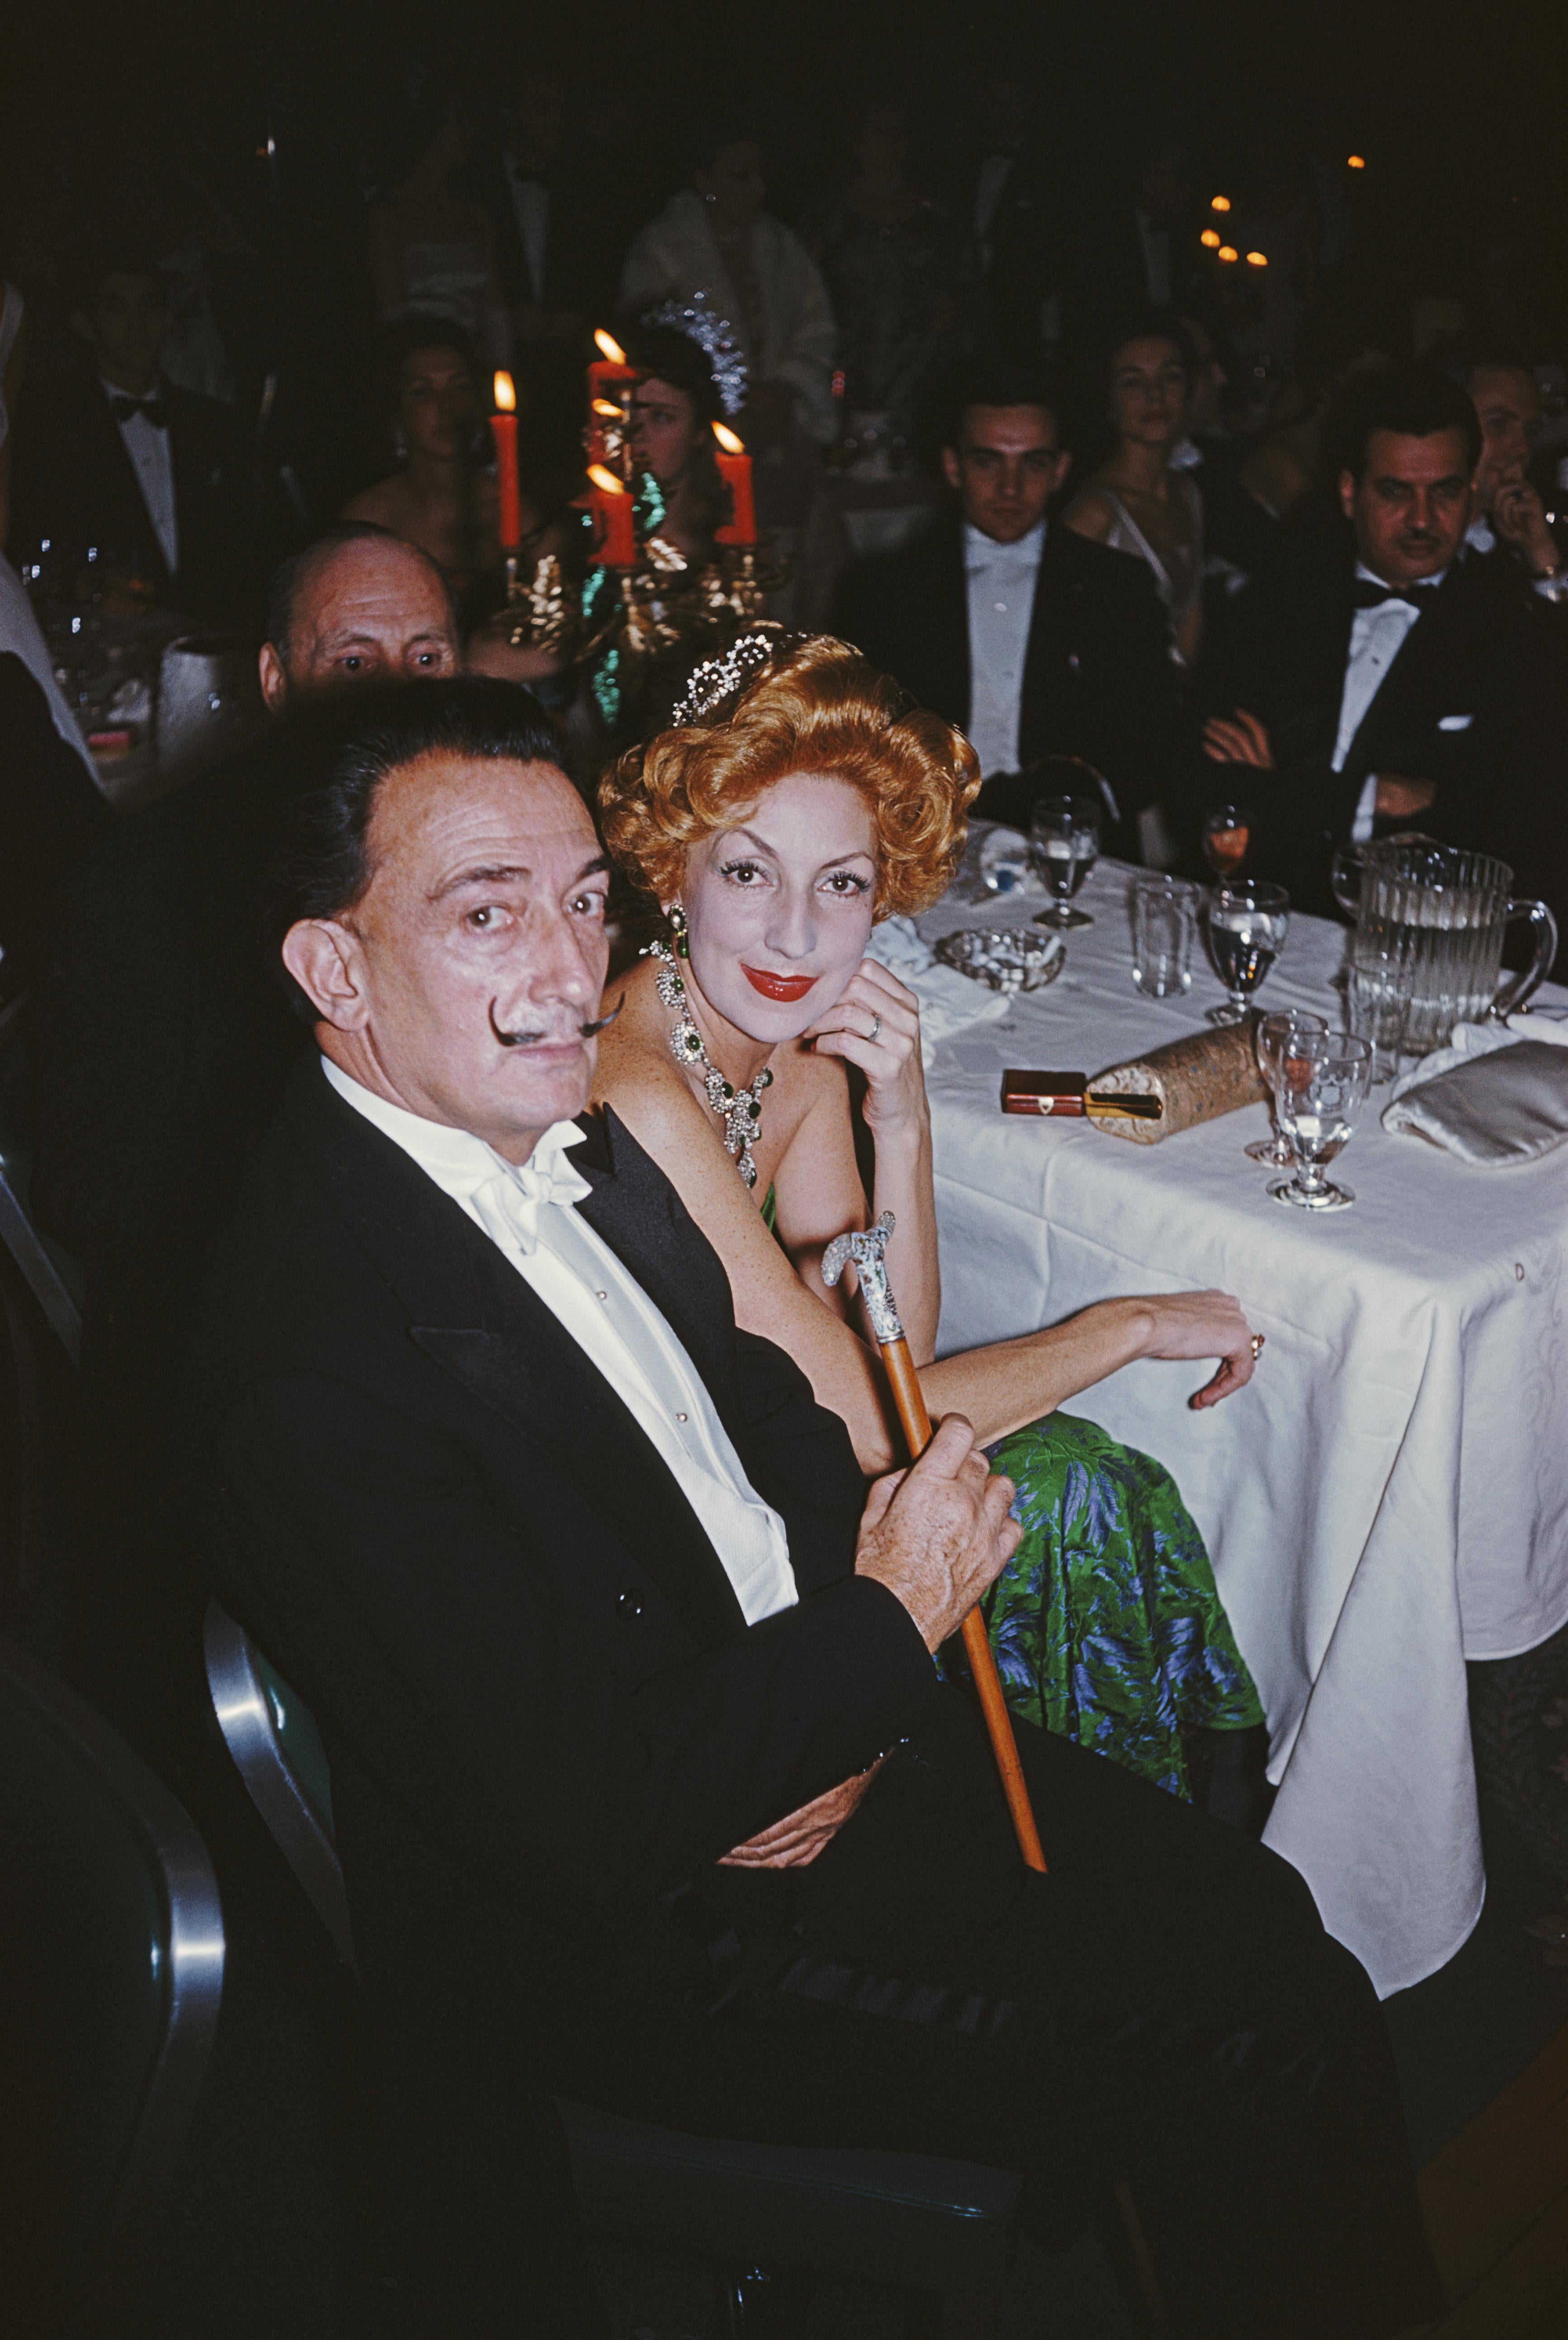 Slim Aarons
Dali's Party
1959
Chromogenic Lambda print
Estate stamped and hand numbered edition of 150 with certificate of authenticity. 

circa 1959: Surrealist painter Salvador Dali (1904 - 1989) with a red-haired woman at a ball in New York. A